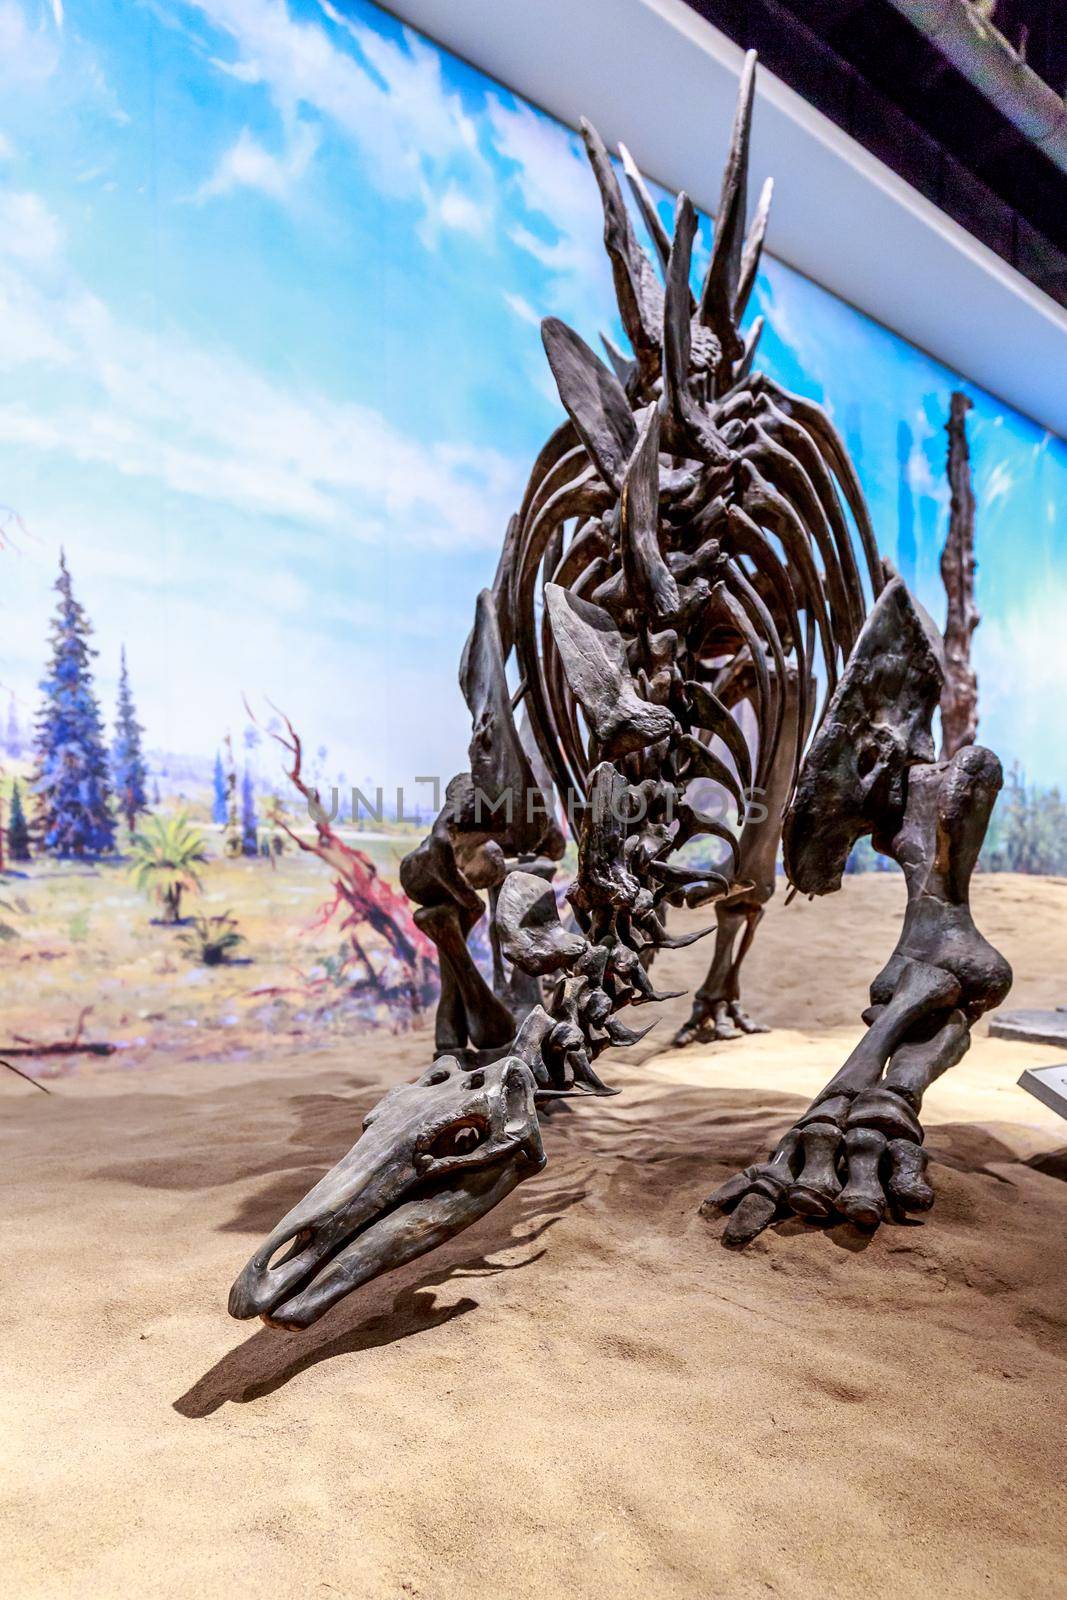 Drumheller, AB Canada - AUGUST 14, 2014: Stegosaurus fossil is on exhibition in Royal Tyrrell Museum of Palaeontology.